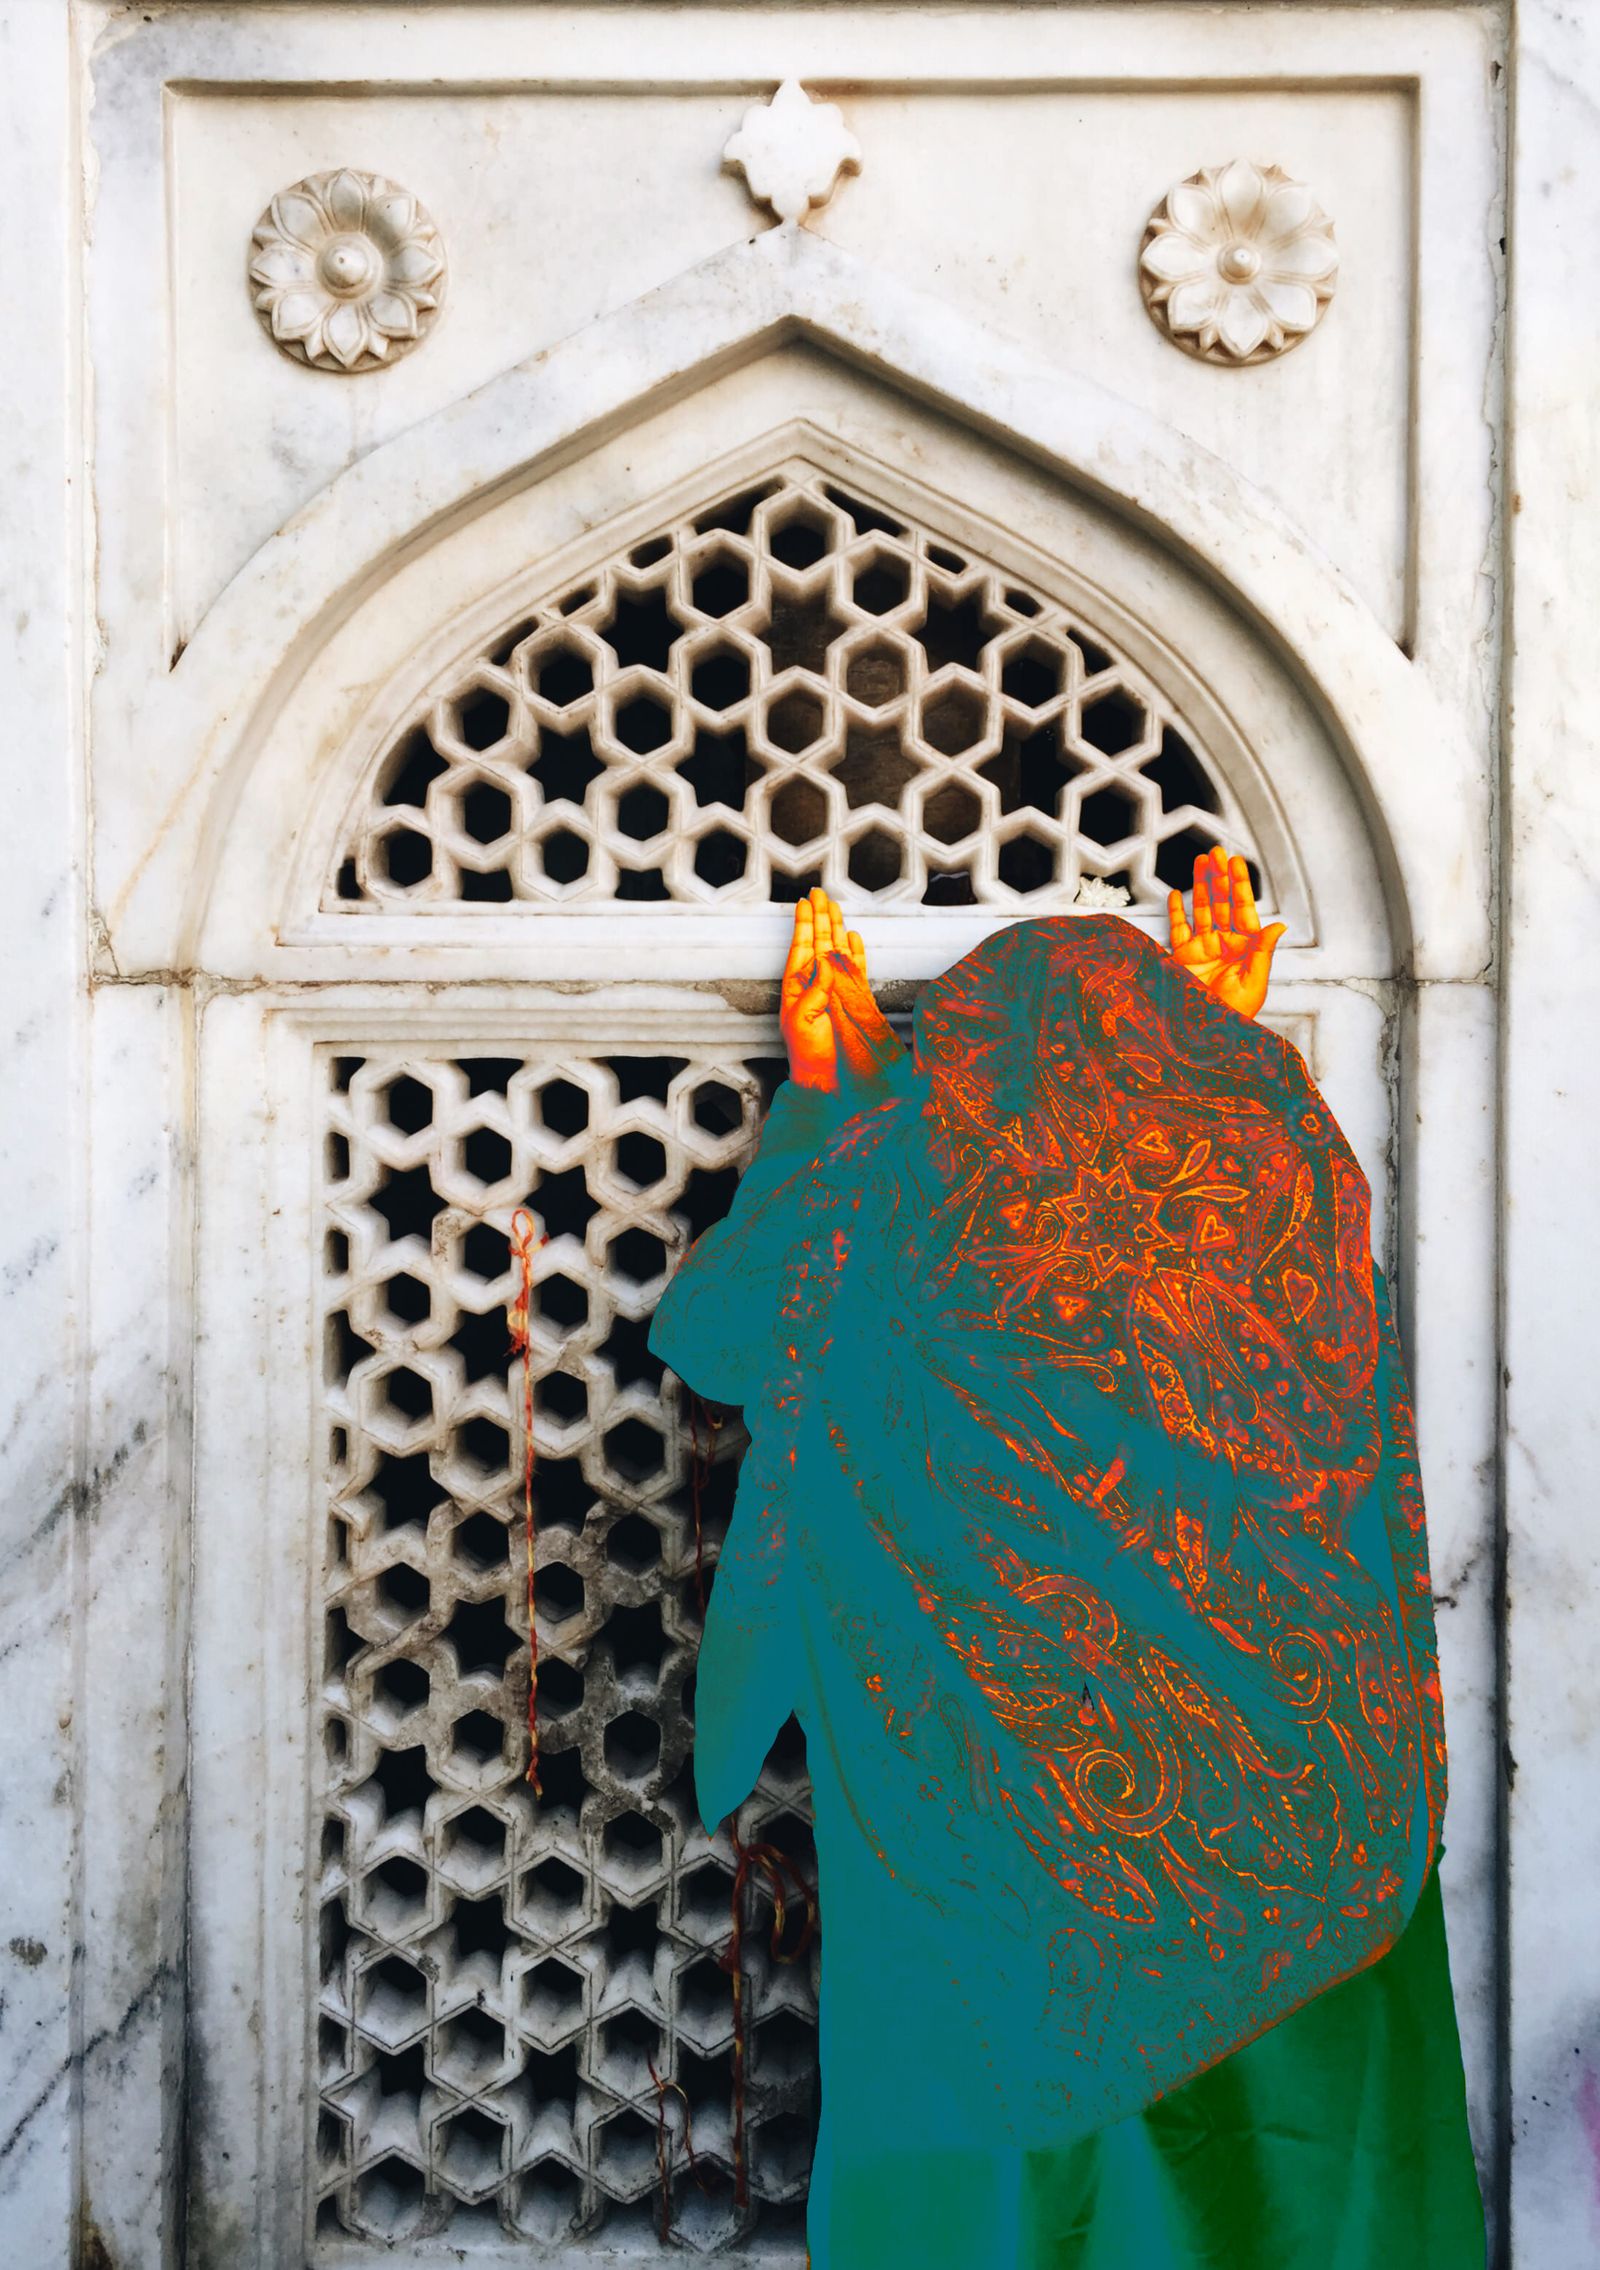 © Rishabh Malik - Image from the Tainted. Exhibit A photography project